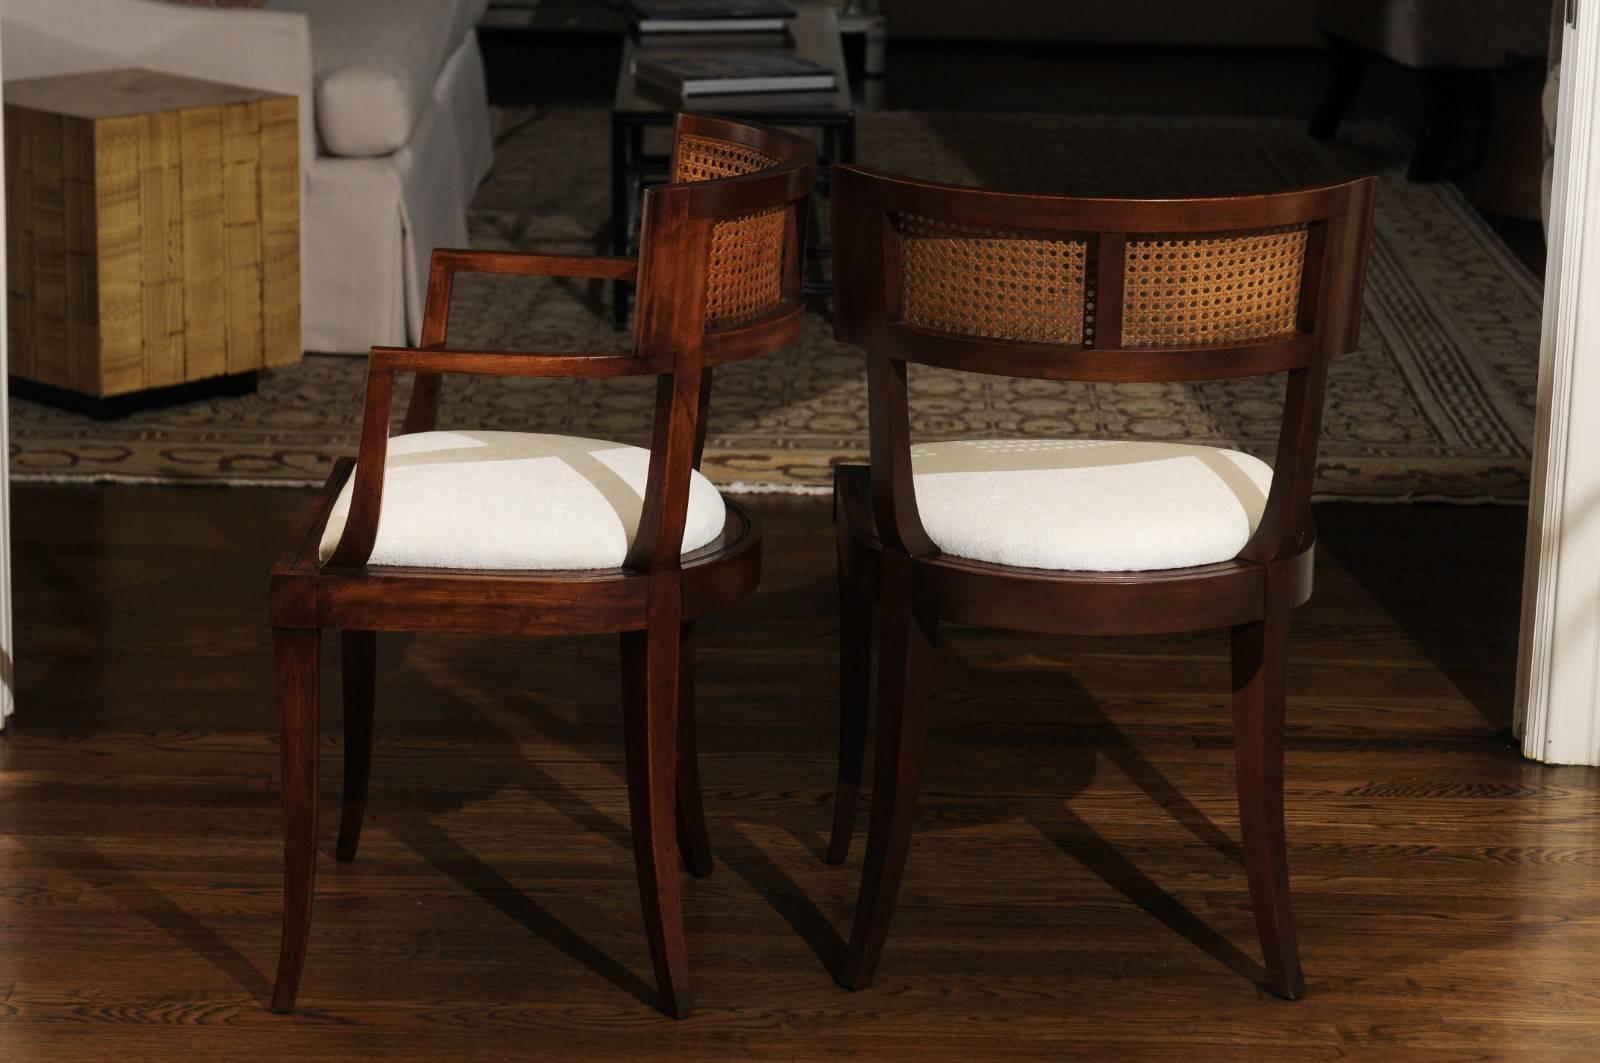 The rarest of the rare: an exceptional, meticulously restored set of eight cane back Klismos dining chairs by Baker Furniture, circa 1958. This design is routinely attributed to the esteemed Michael Taylor. Expertly crafted solid cherry construction